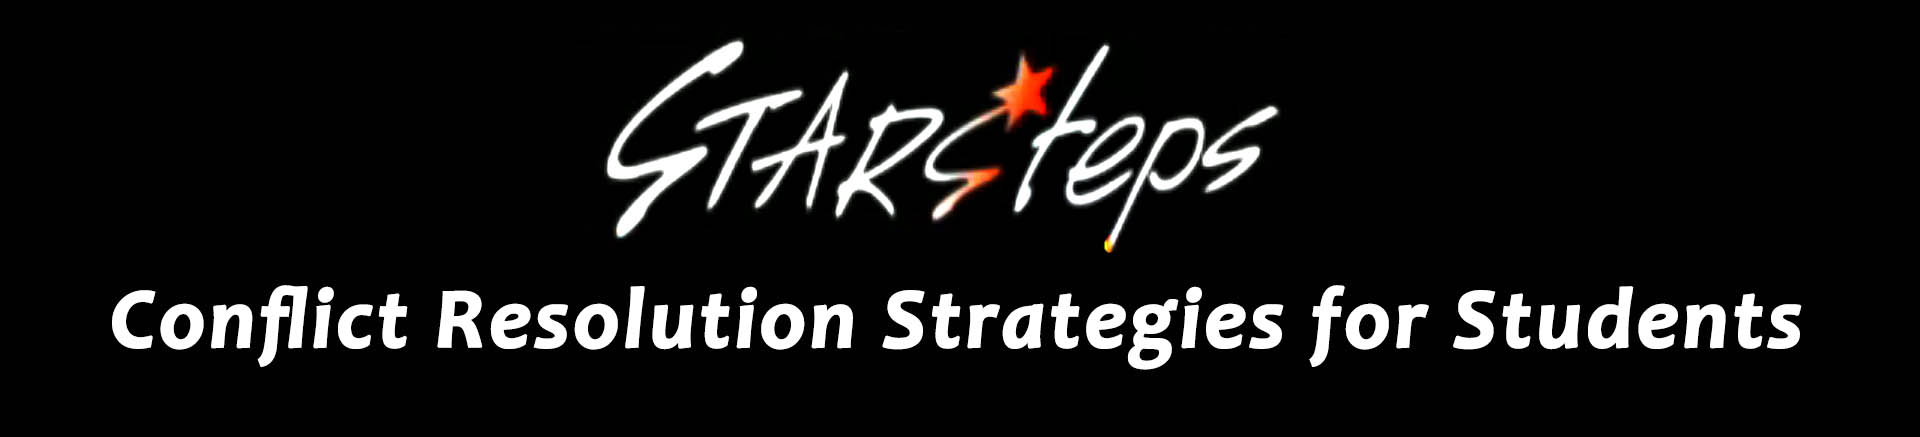 STARSTEPS: Conflict Resolution Strategies for Students